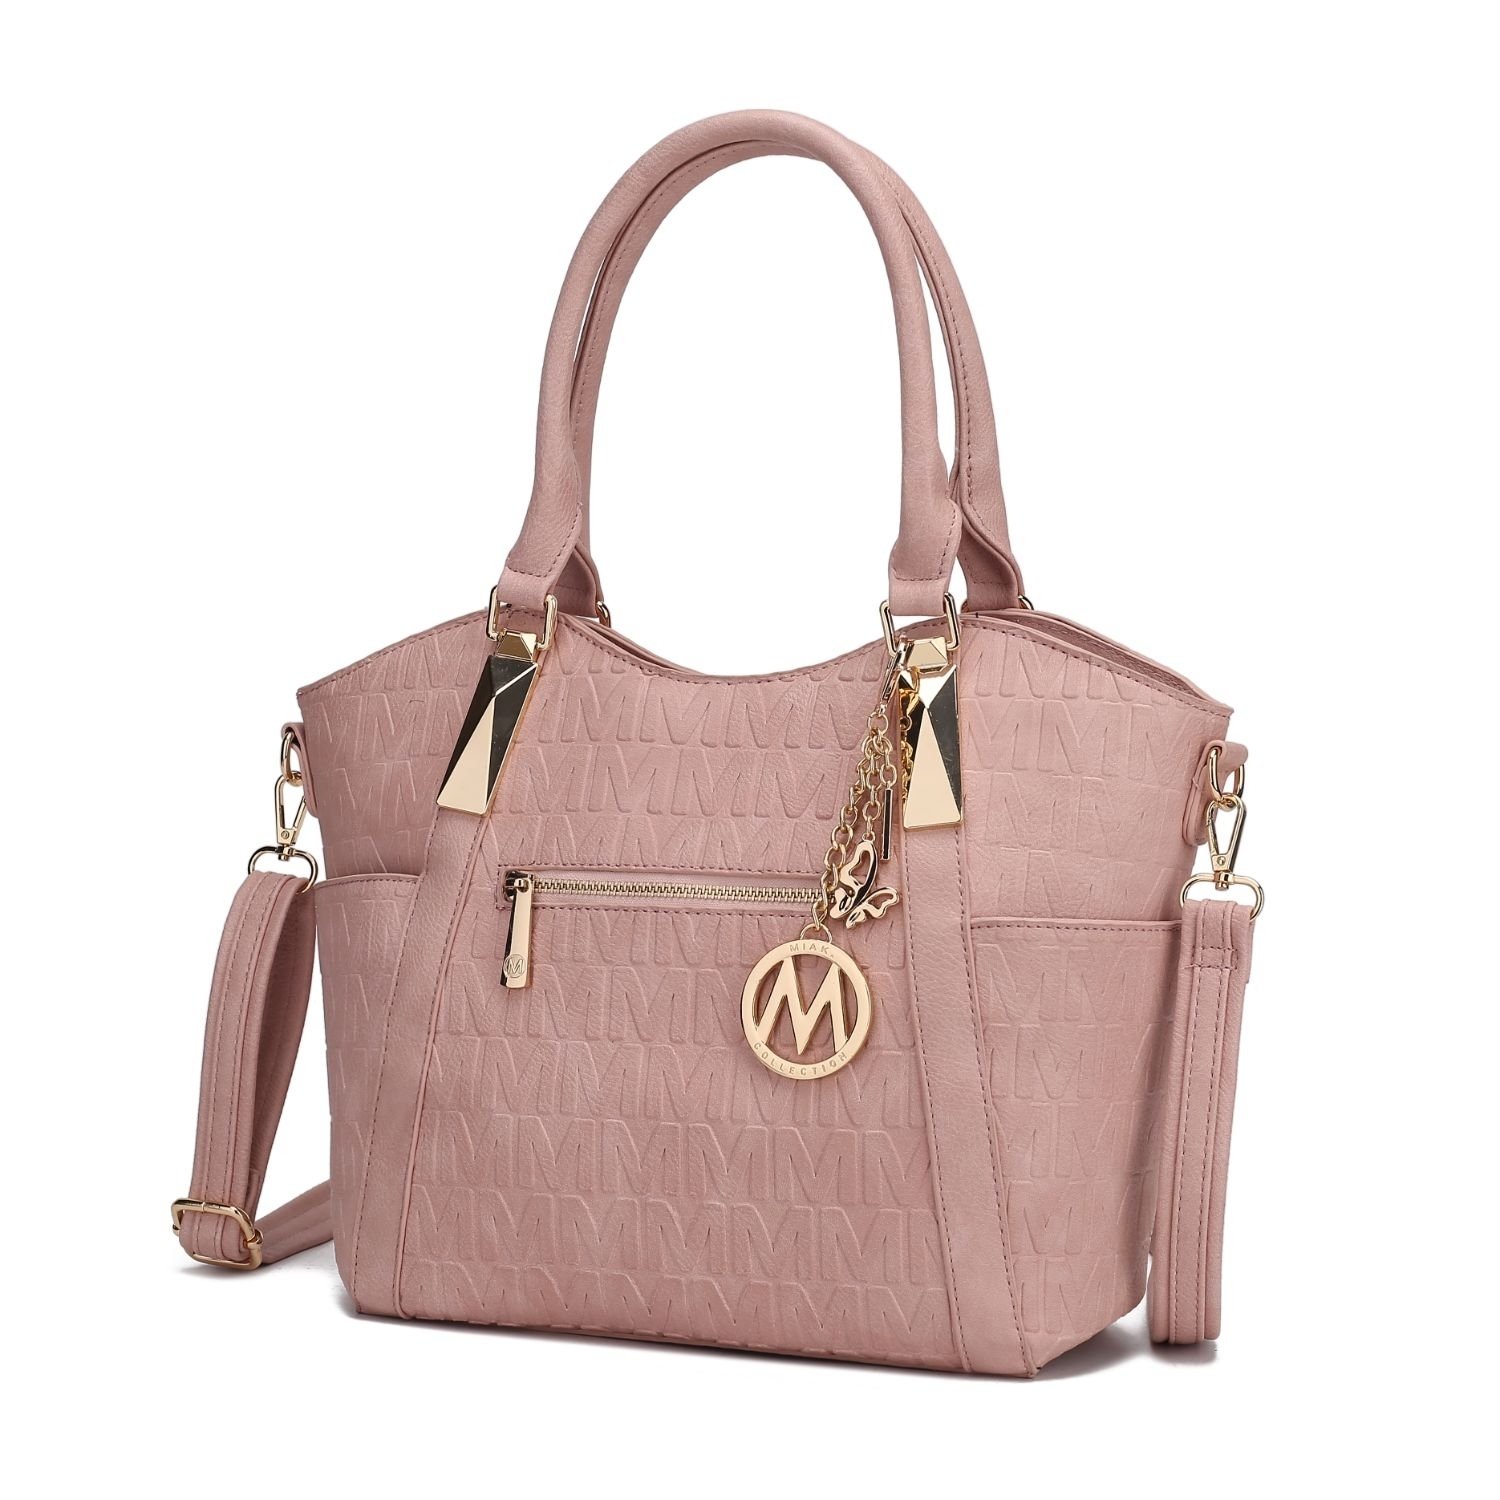 MKF Collection Lucy Tote Handbag By Mia K. - Rose Pink